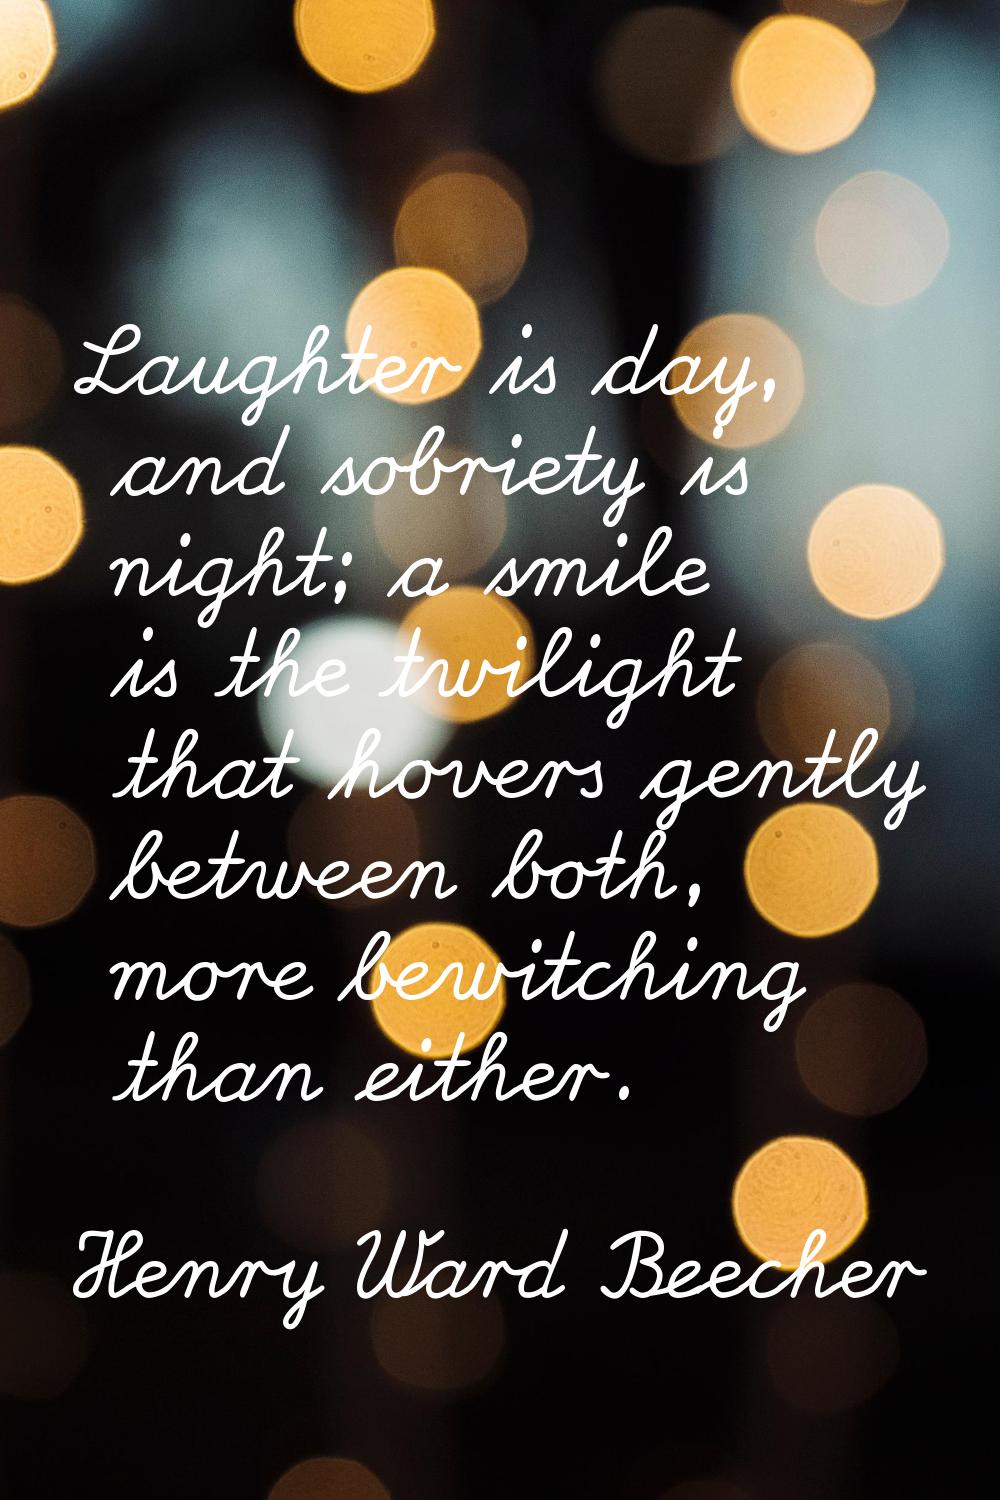 Laughter is day, and sobriety is night; a smile is the twilight that hovers gently between both, mo